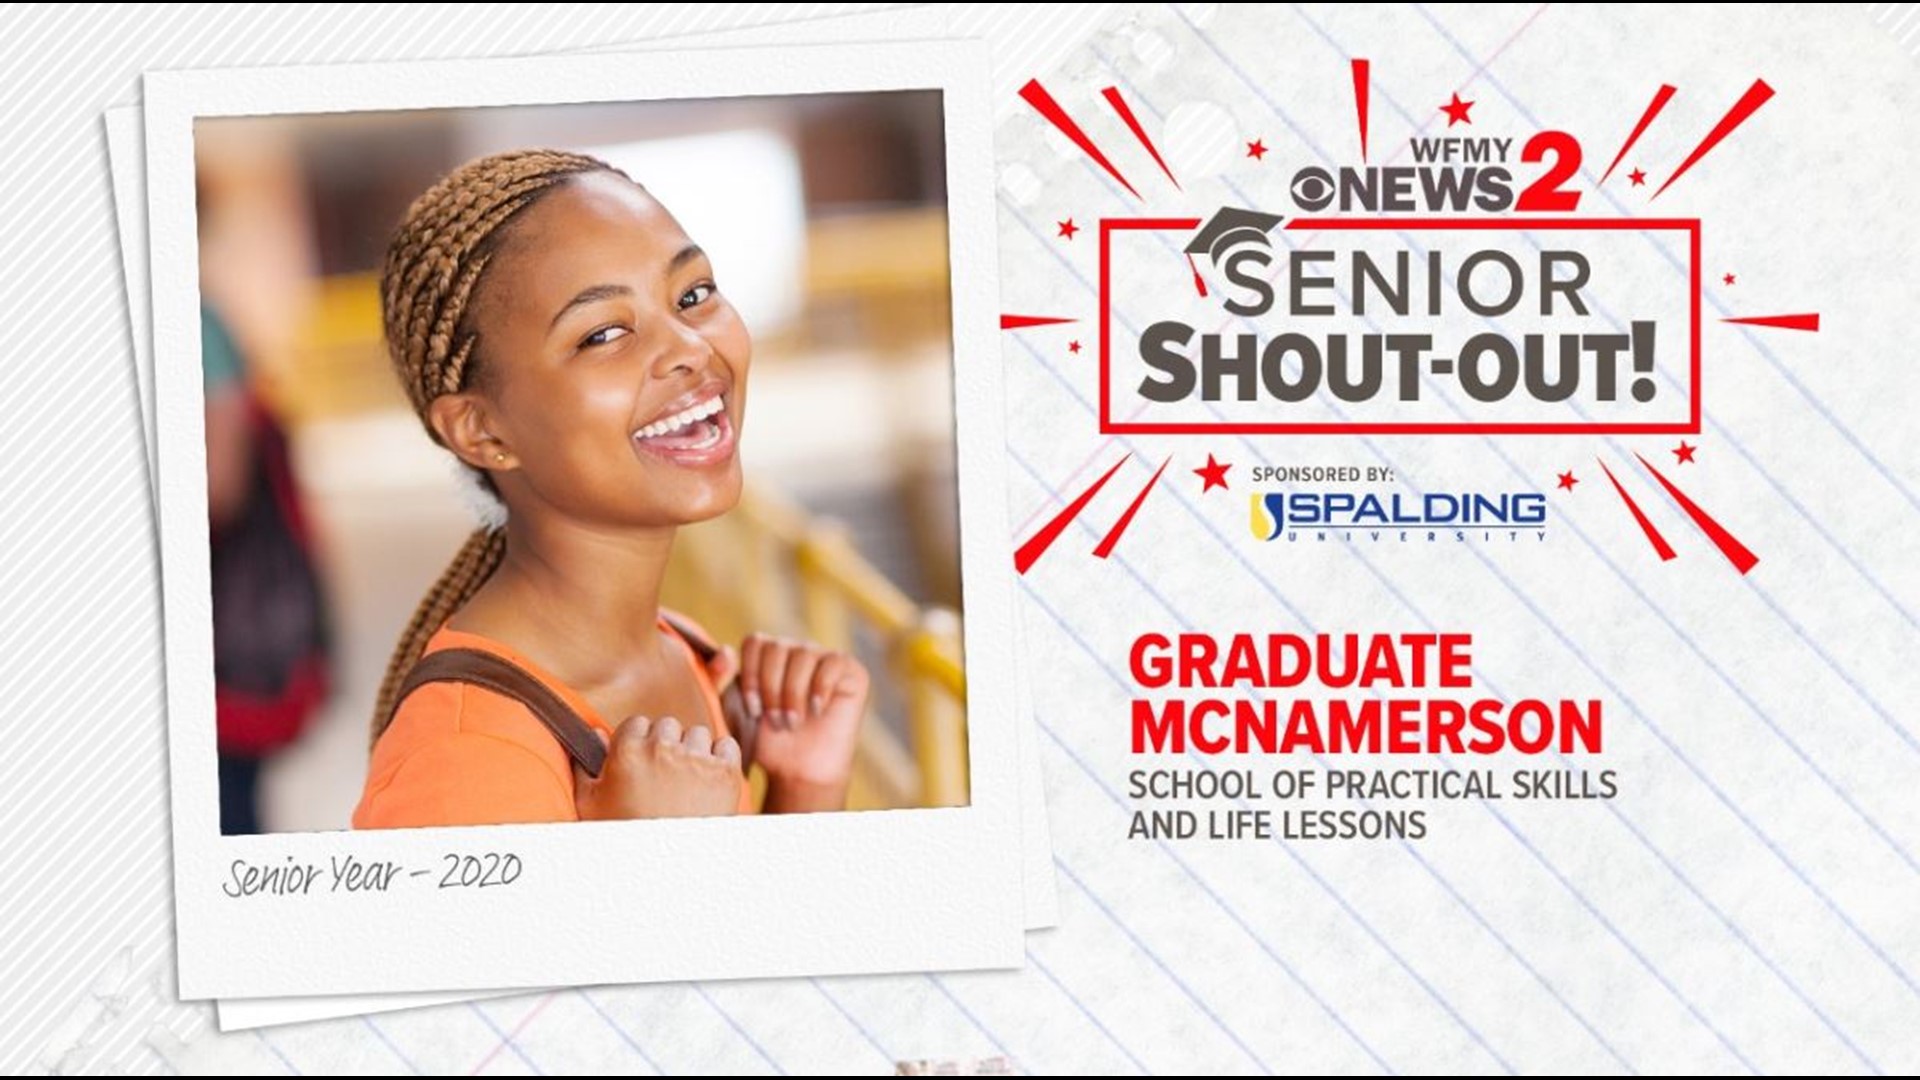 WFMY News 2 wants to make sure the Senior Class of 2020 gets its shoutouts.